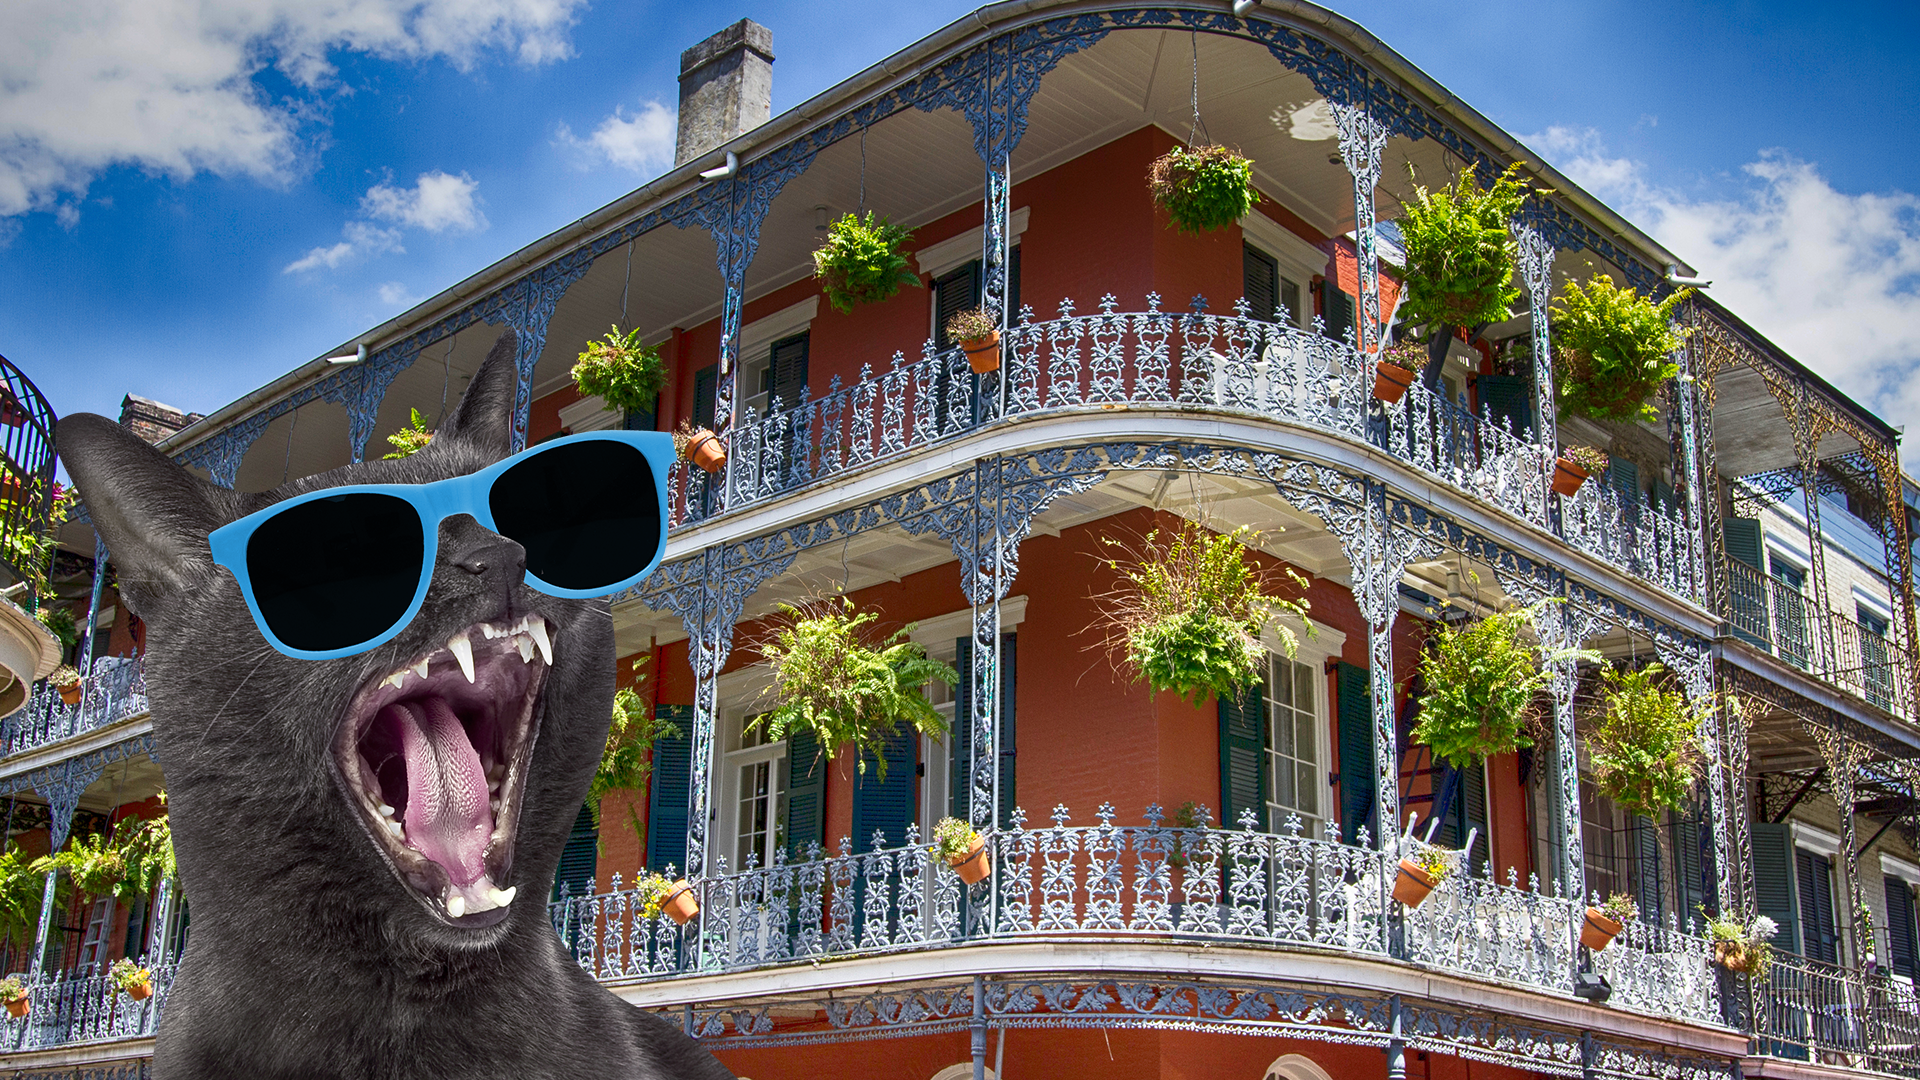 A cat in New Orleans